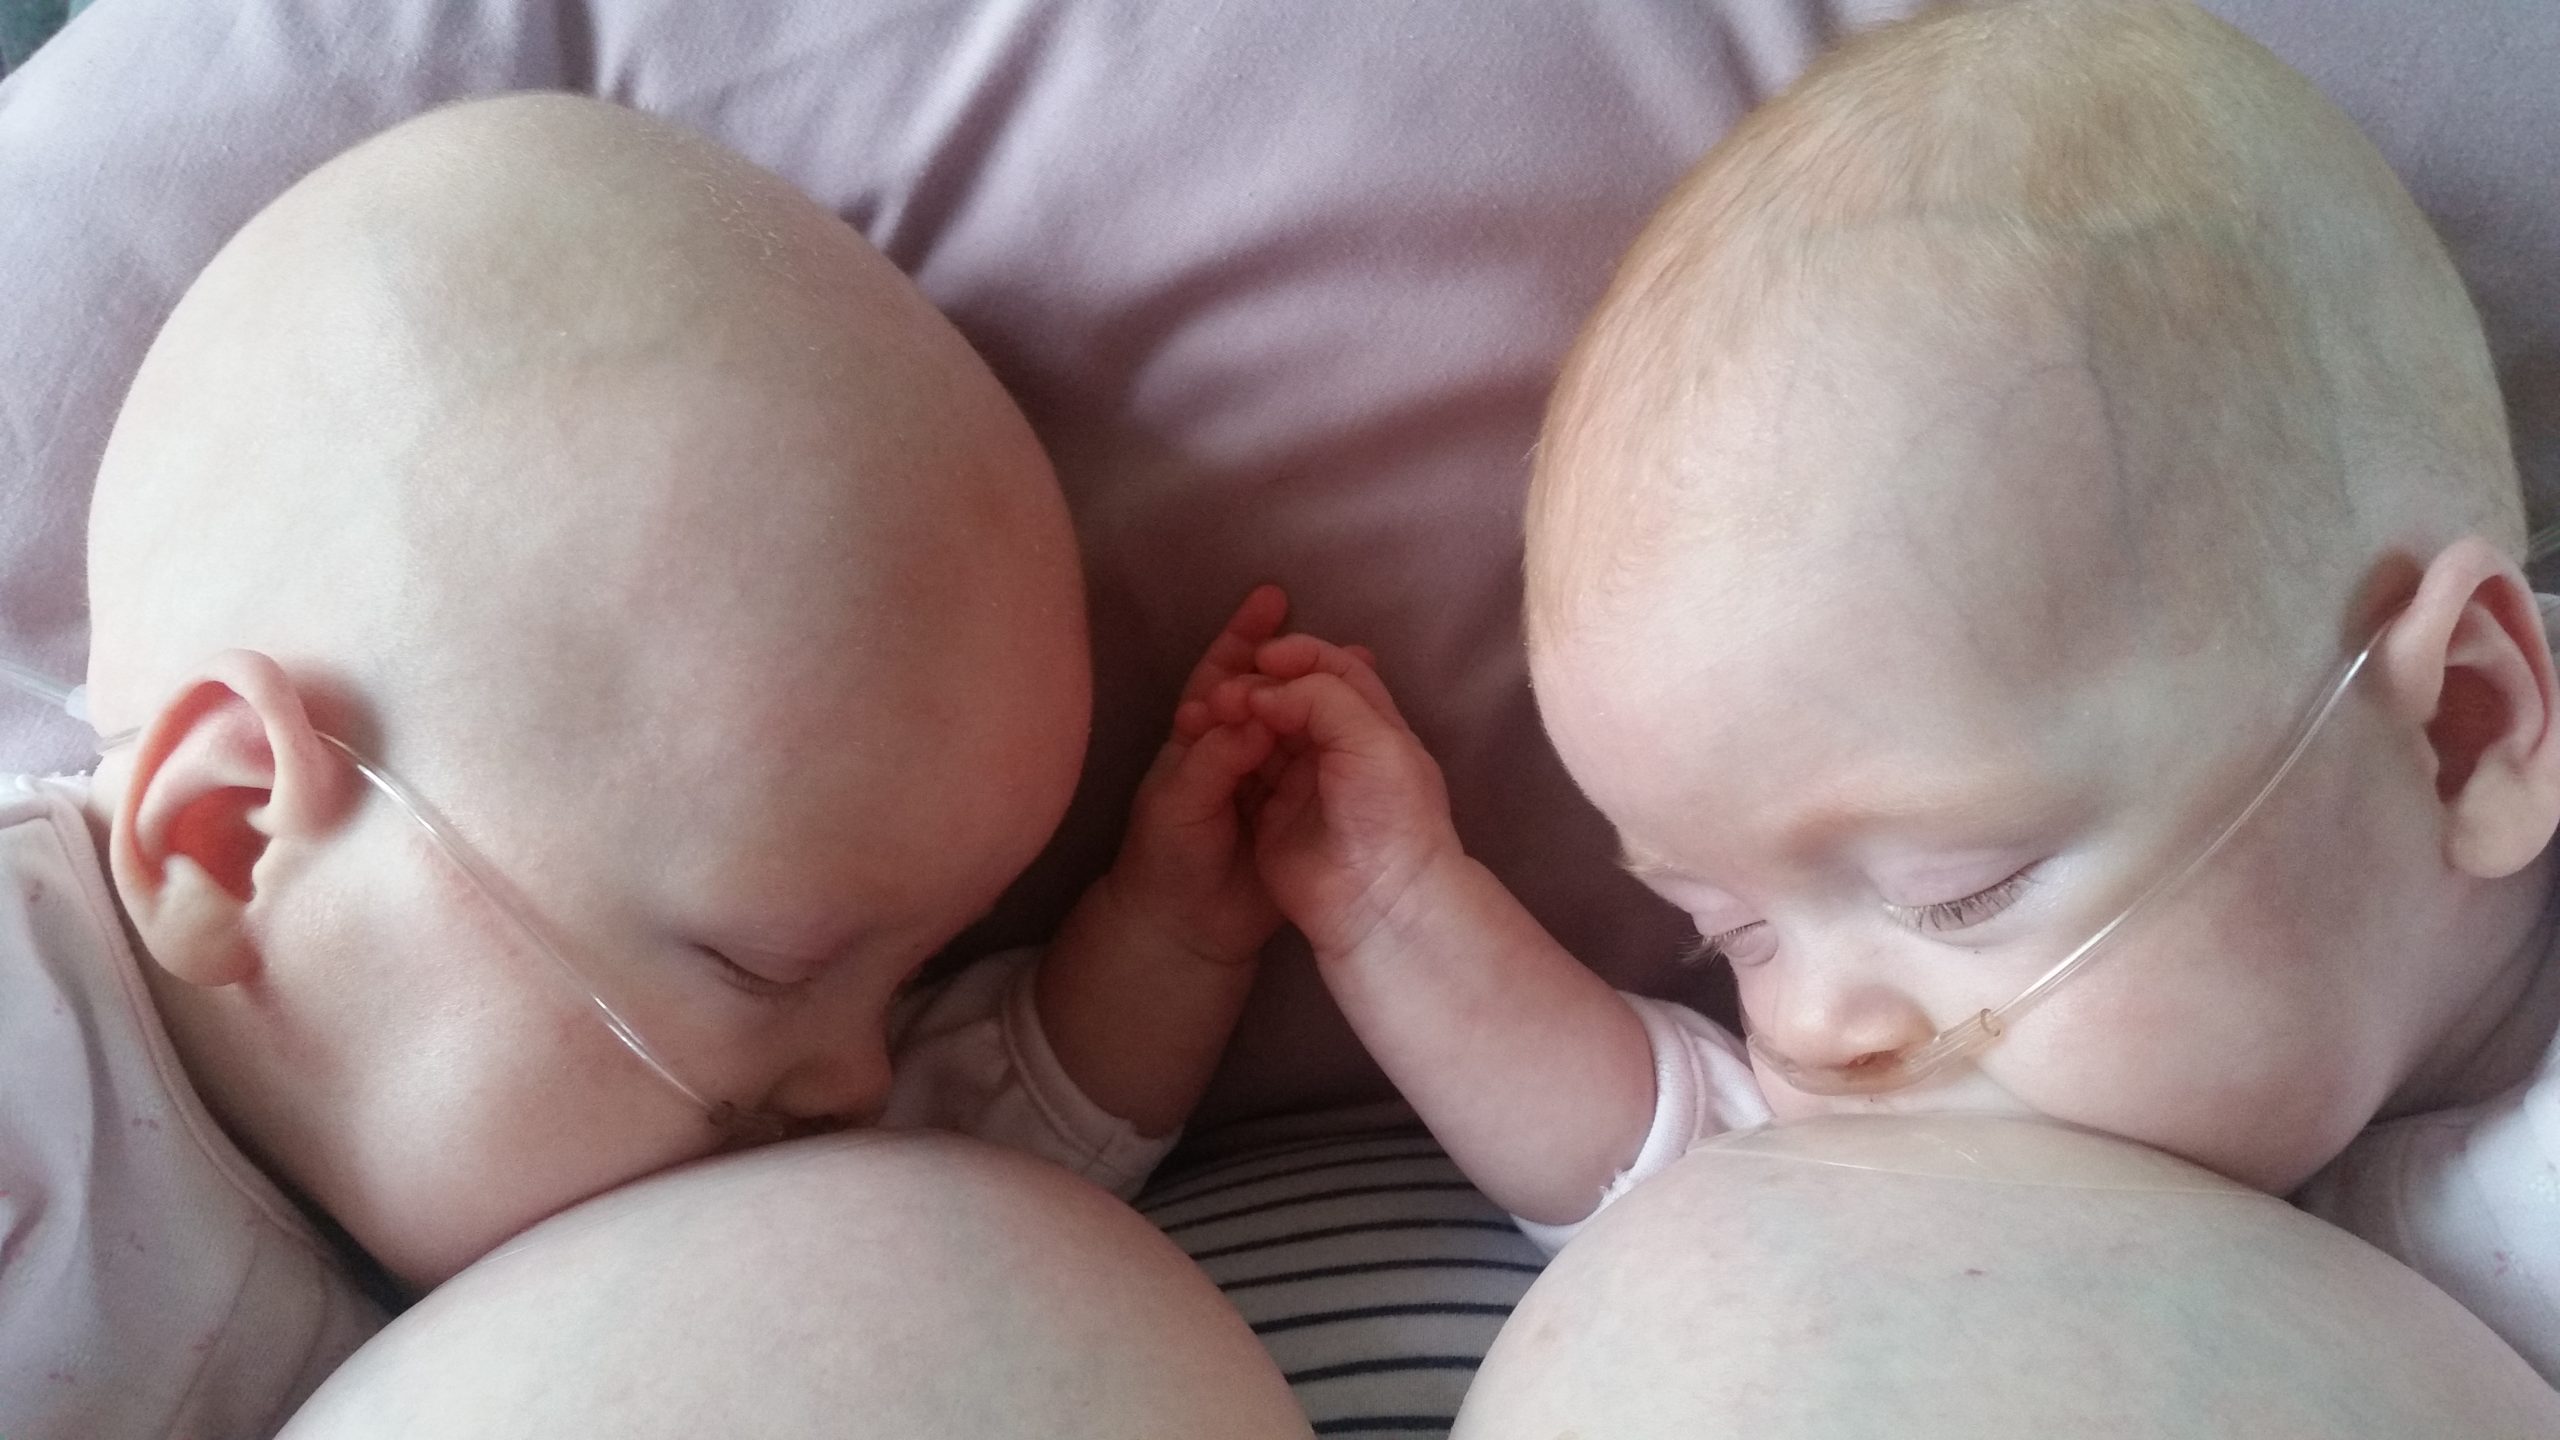 Twin babies hold hands while feeding from a breast each.